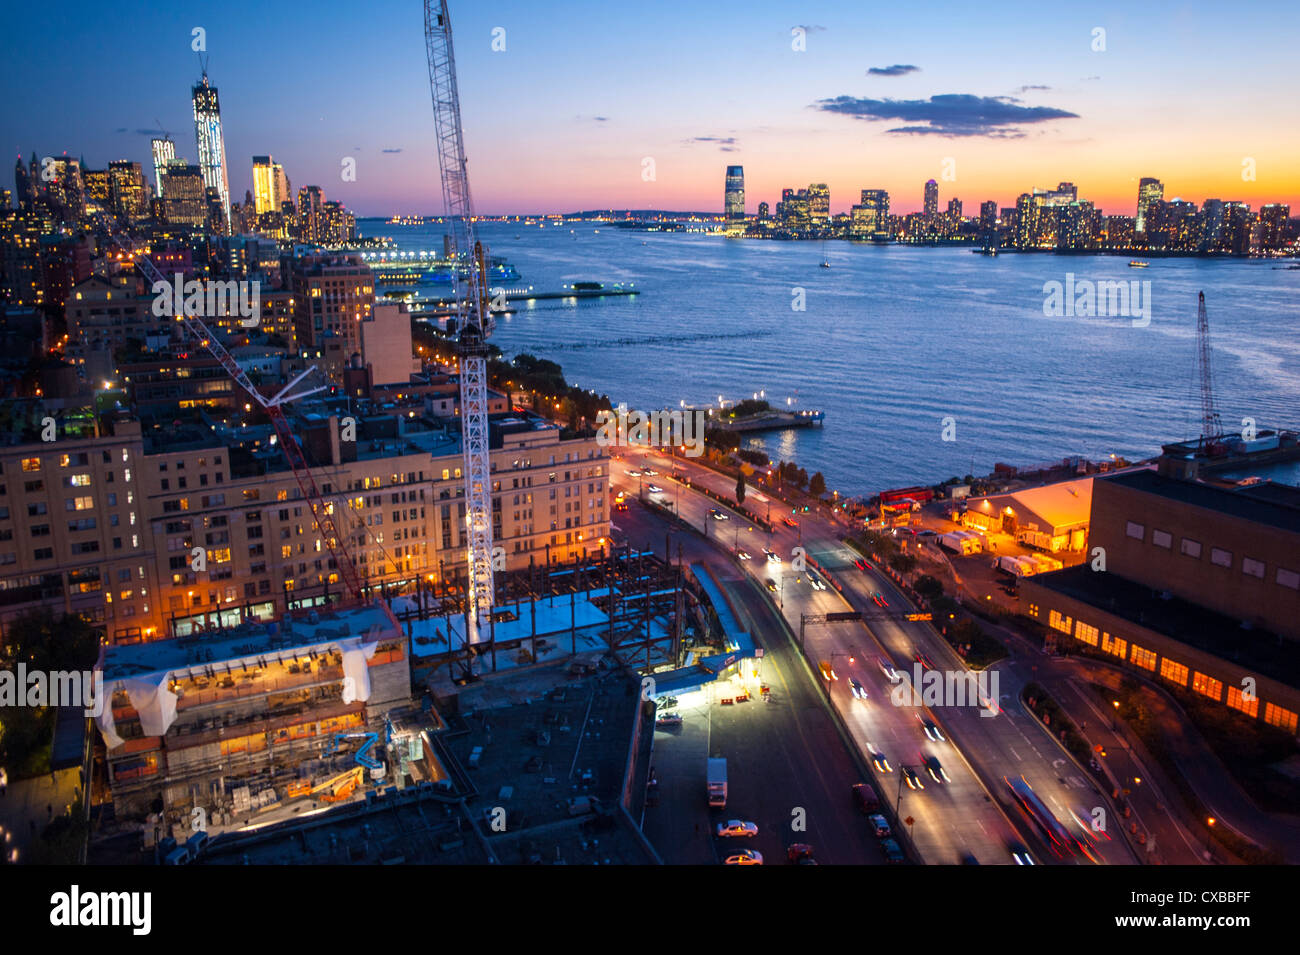 New York, NY, USA, Nighttime Overviews, Cityscapes, Meatpacking DIstrict, Manhattan, Hudson River Stock Photo